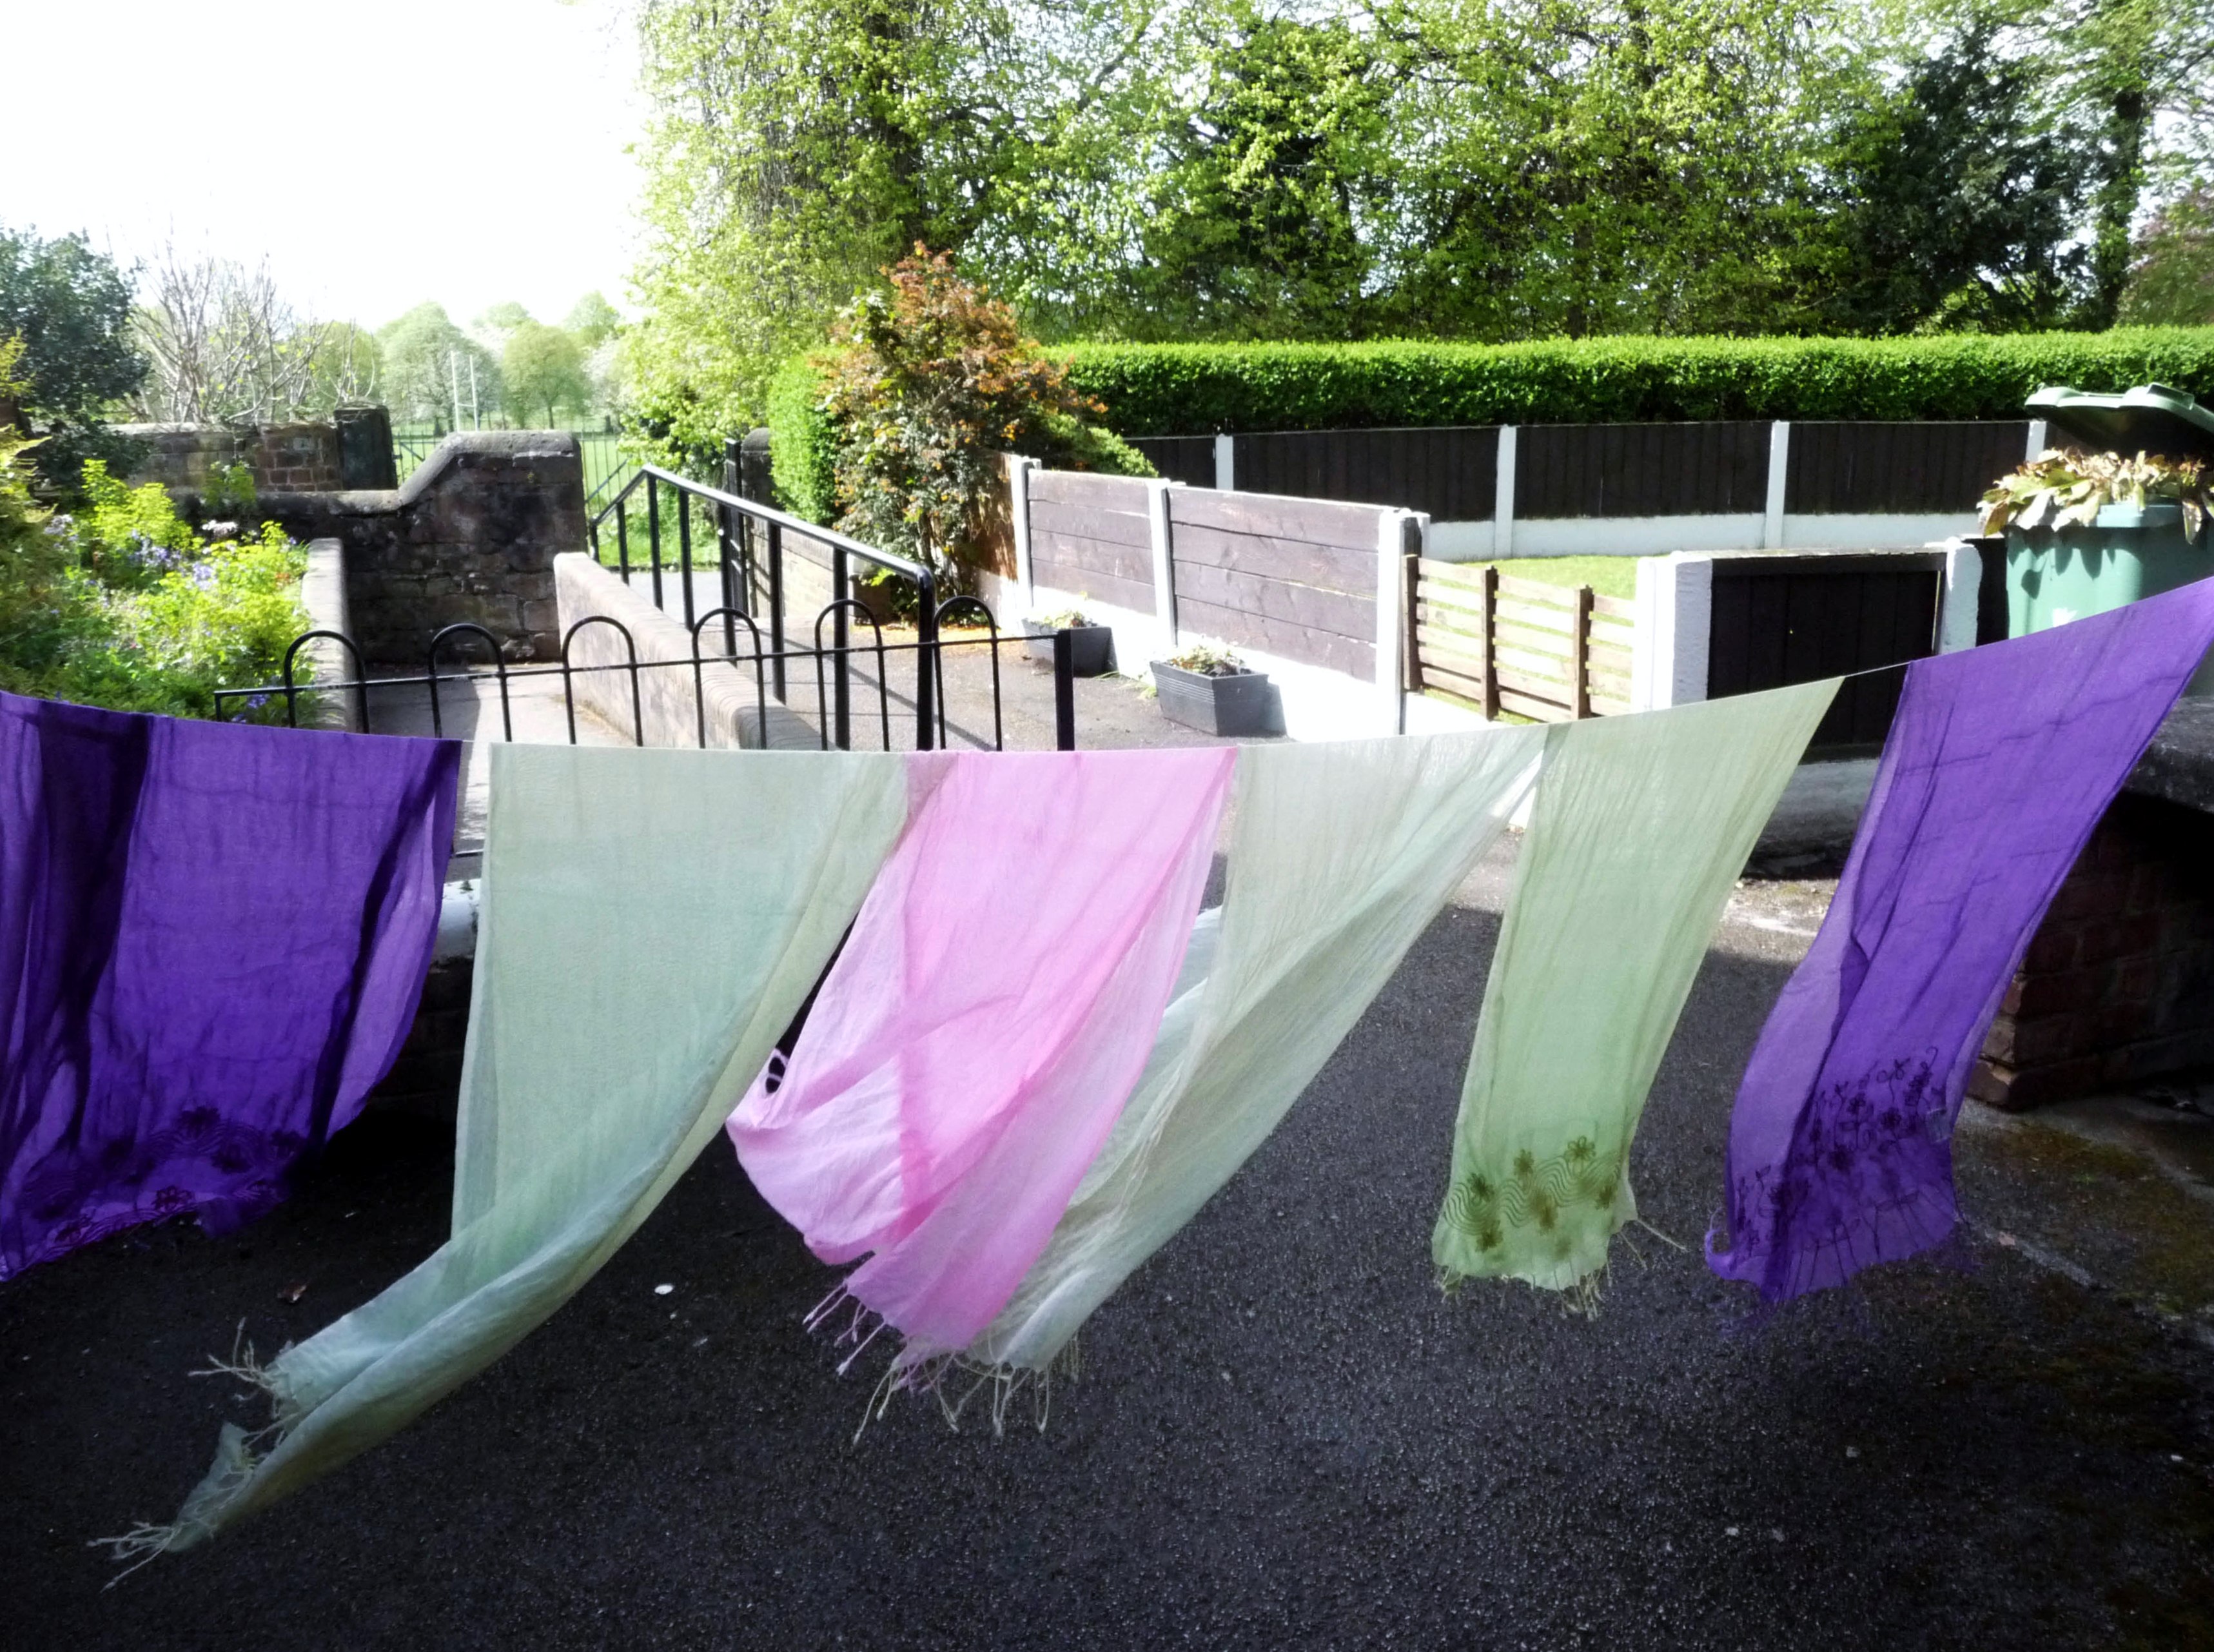 some of our dyed Sreepur scarves hanging in the sun to dry